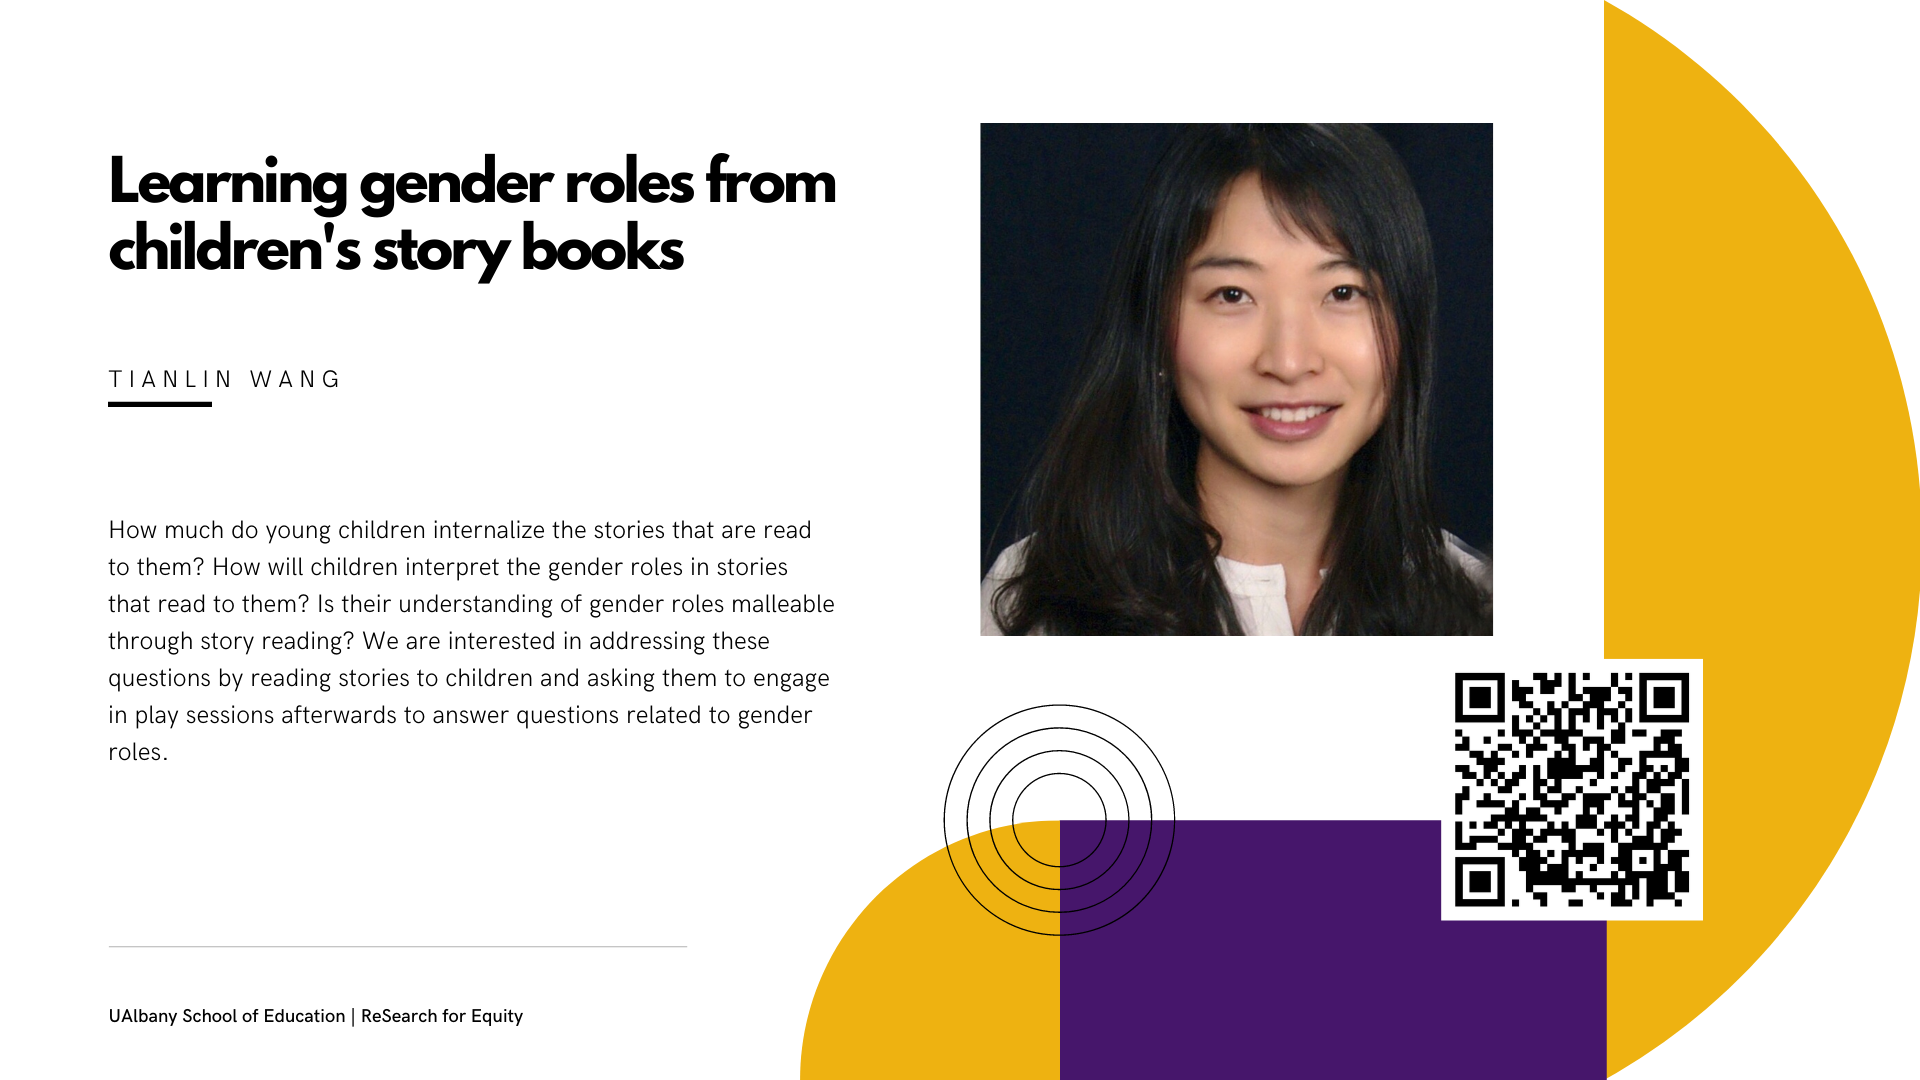 white slide with title and same text as caption, purple and yellow shapes to the right, photo of smiling Tianlin Wang in a white top, QR code